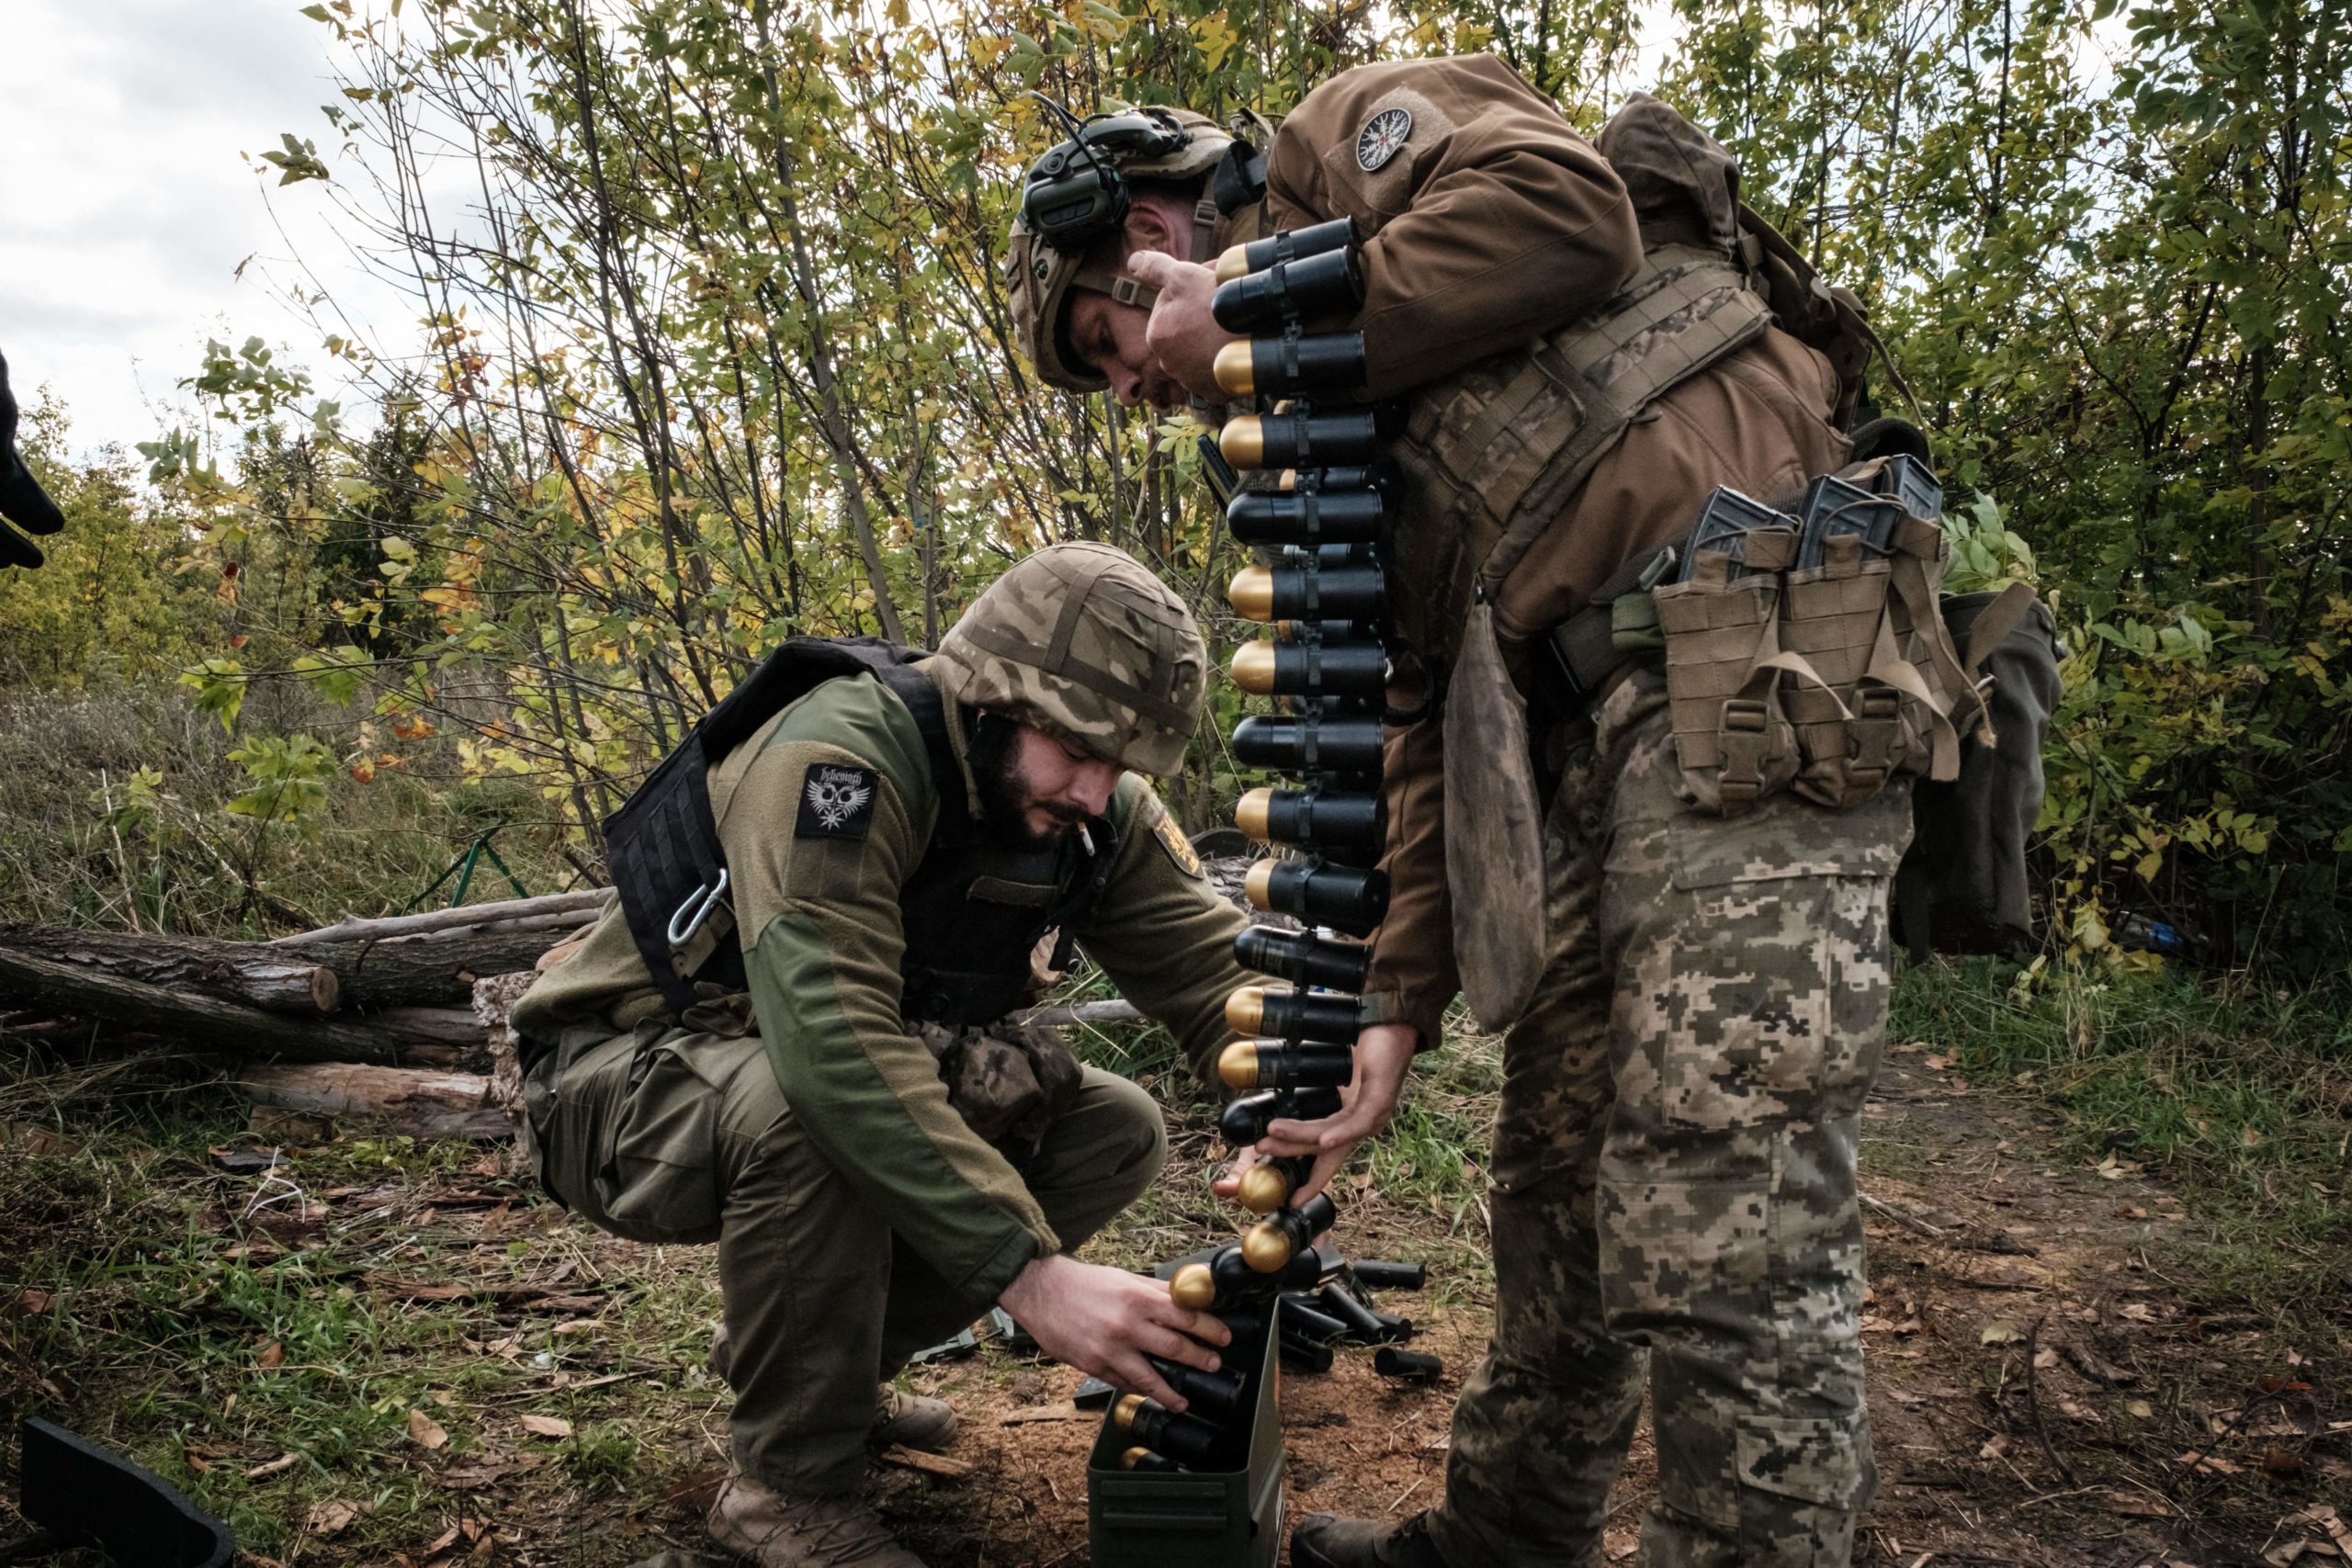 Soldiers of Ukraine's 5th Regiment of Assault Infantry put ammunition into a crate before setting a US-made MK-19 automatic grenade launcher towards Russian positions in less than 800 metres away at a front line near Toretsk in the Donetsk region on October 12, 2022, amid the Russian invasion of Ukraine. 